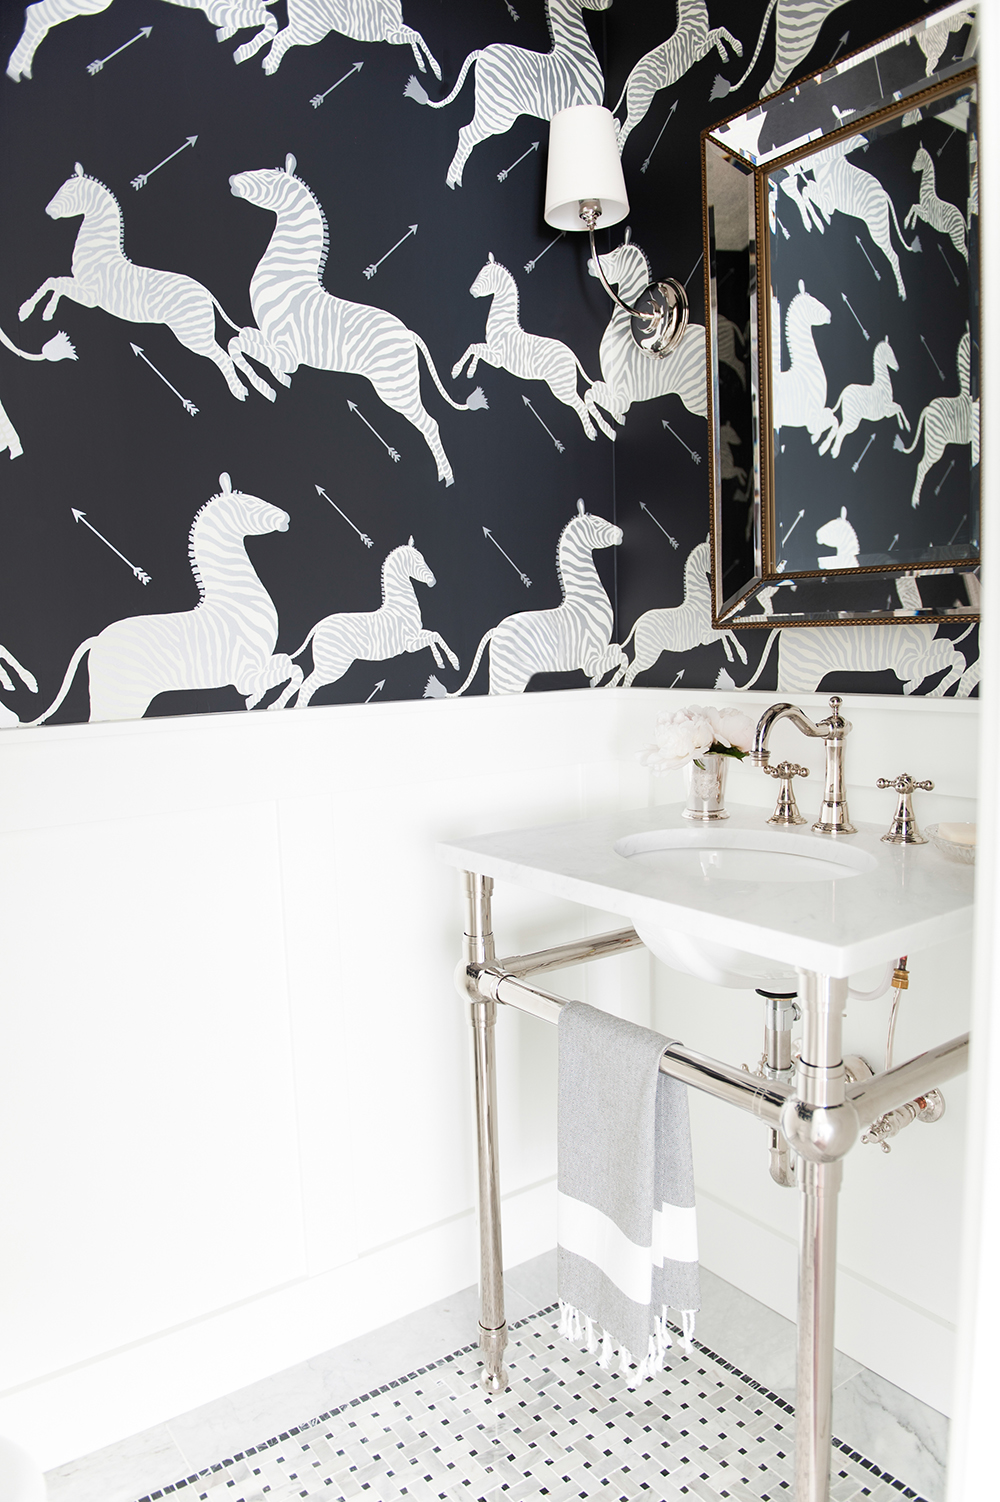 The powder room's knockout wallpaper has unexpected provenance